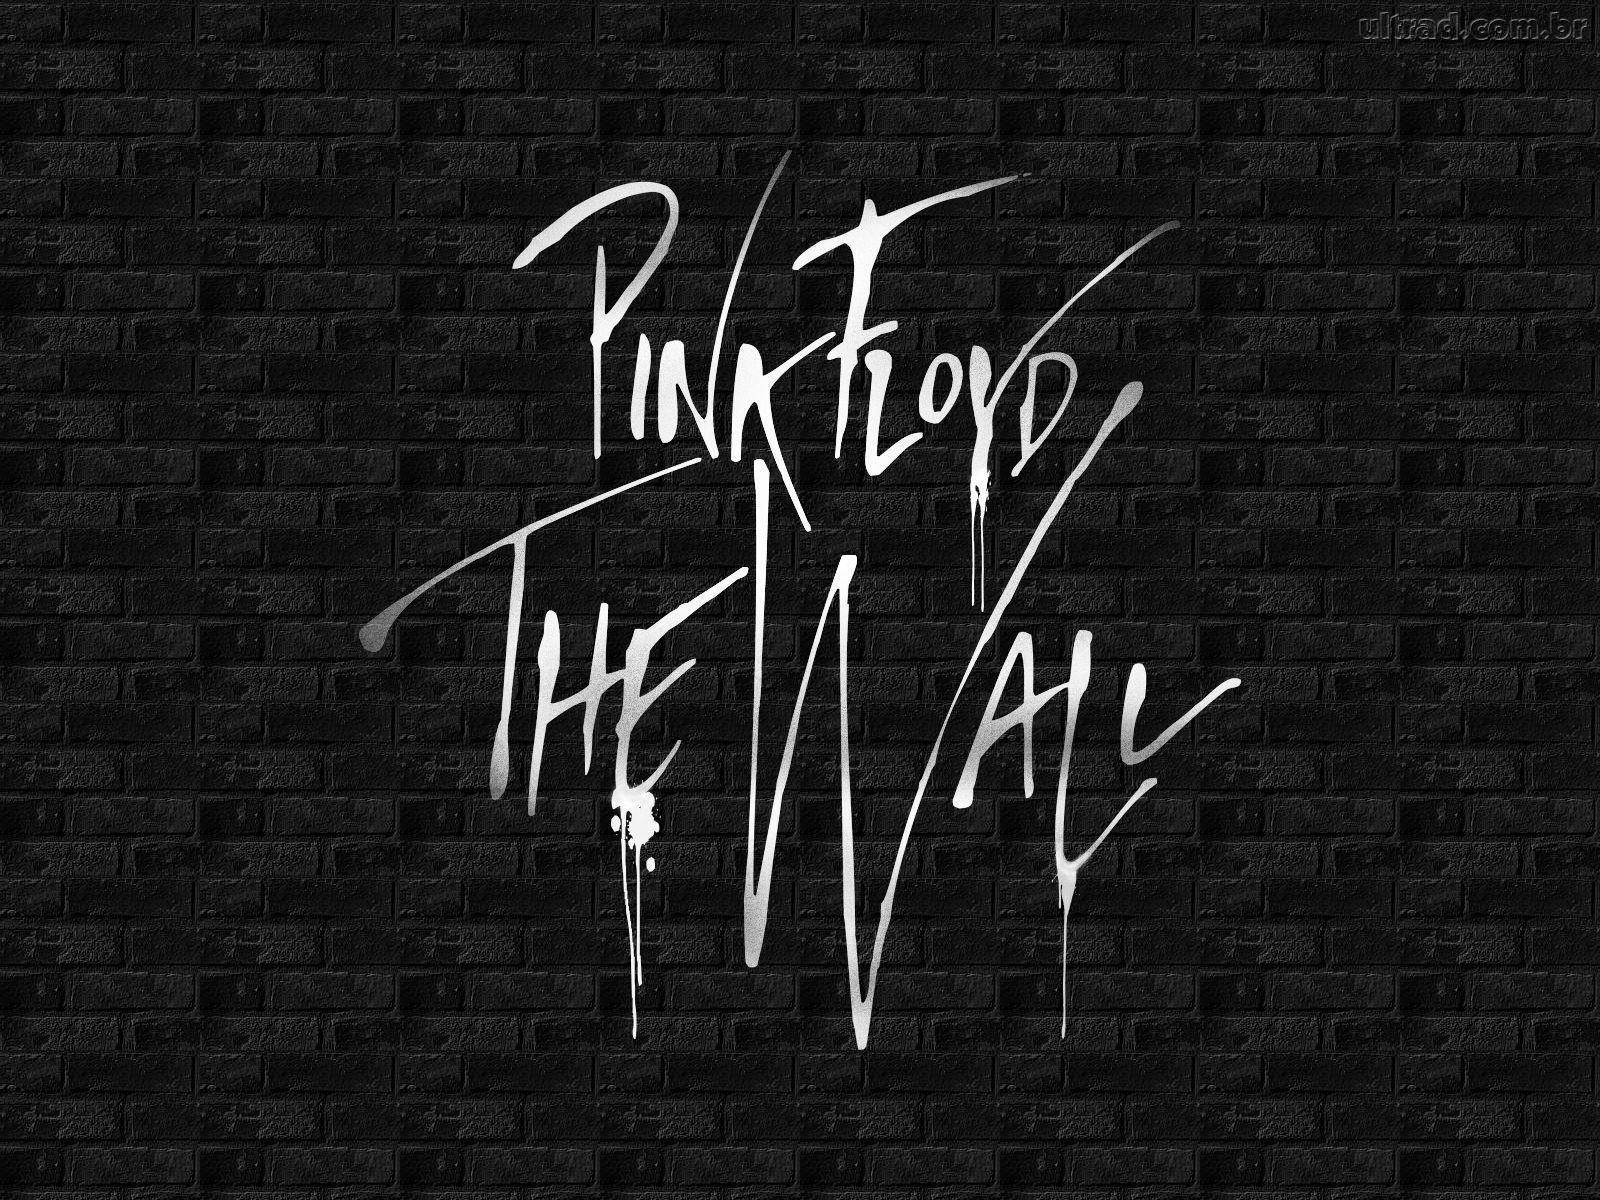 Pink Floyd The Wall Wallpapers 1600x1200PX ~ Wallpapers Free Pink